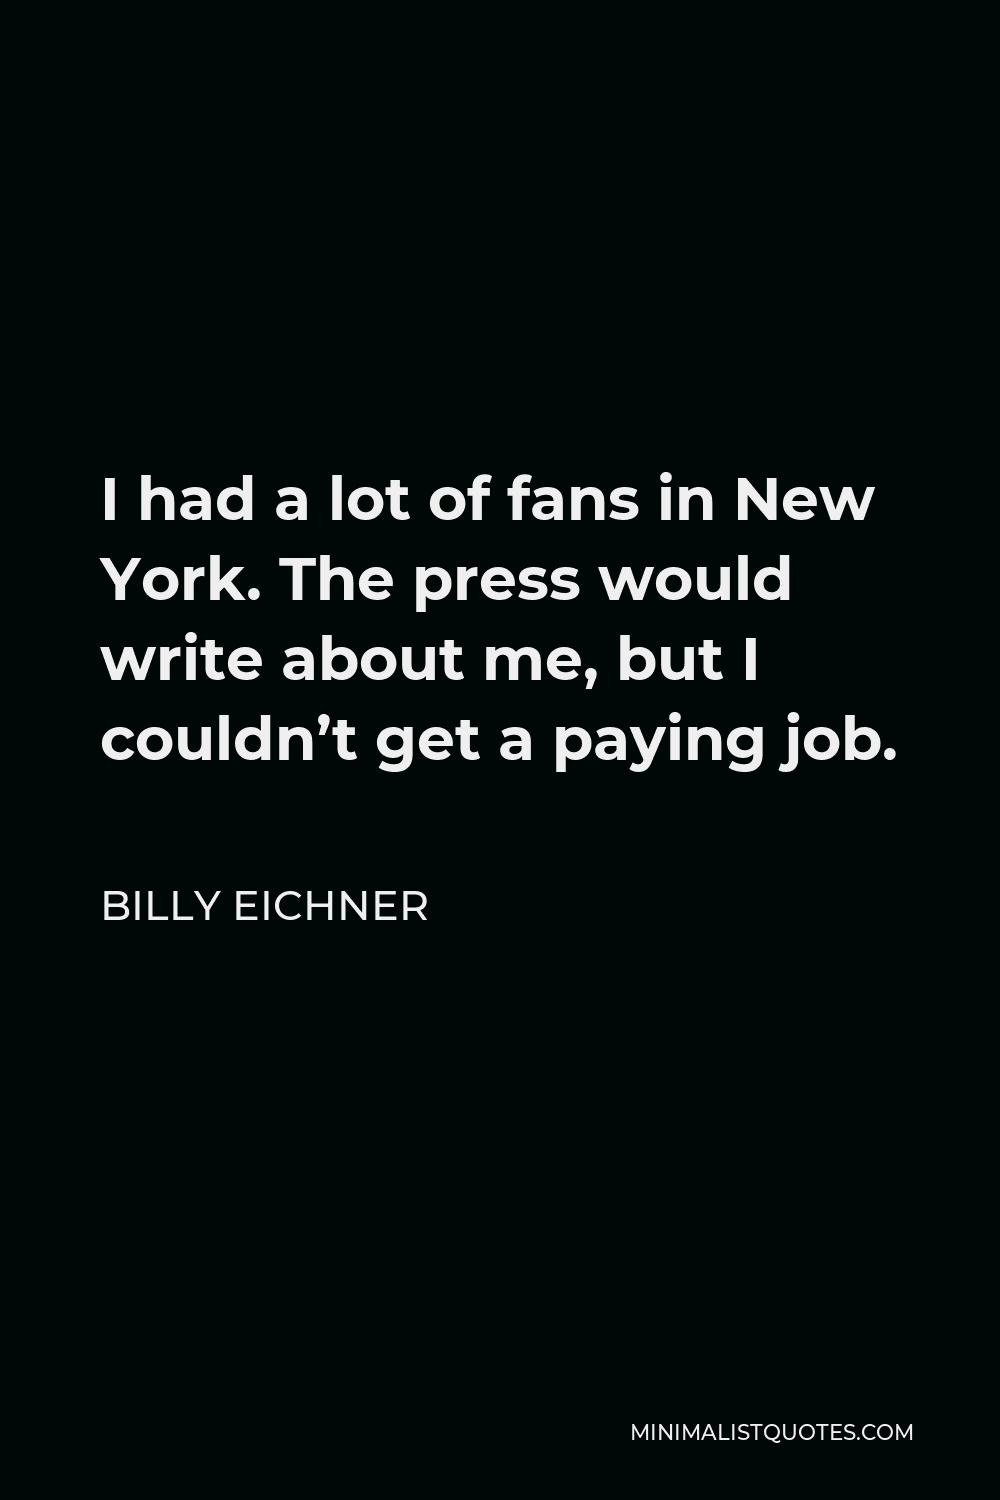 Billy Eichner Quote - I had a lot of fans in New York. The press would write about me, but I couldn’t get a paying job.